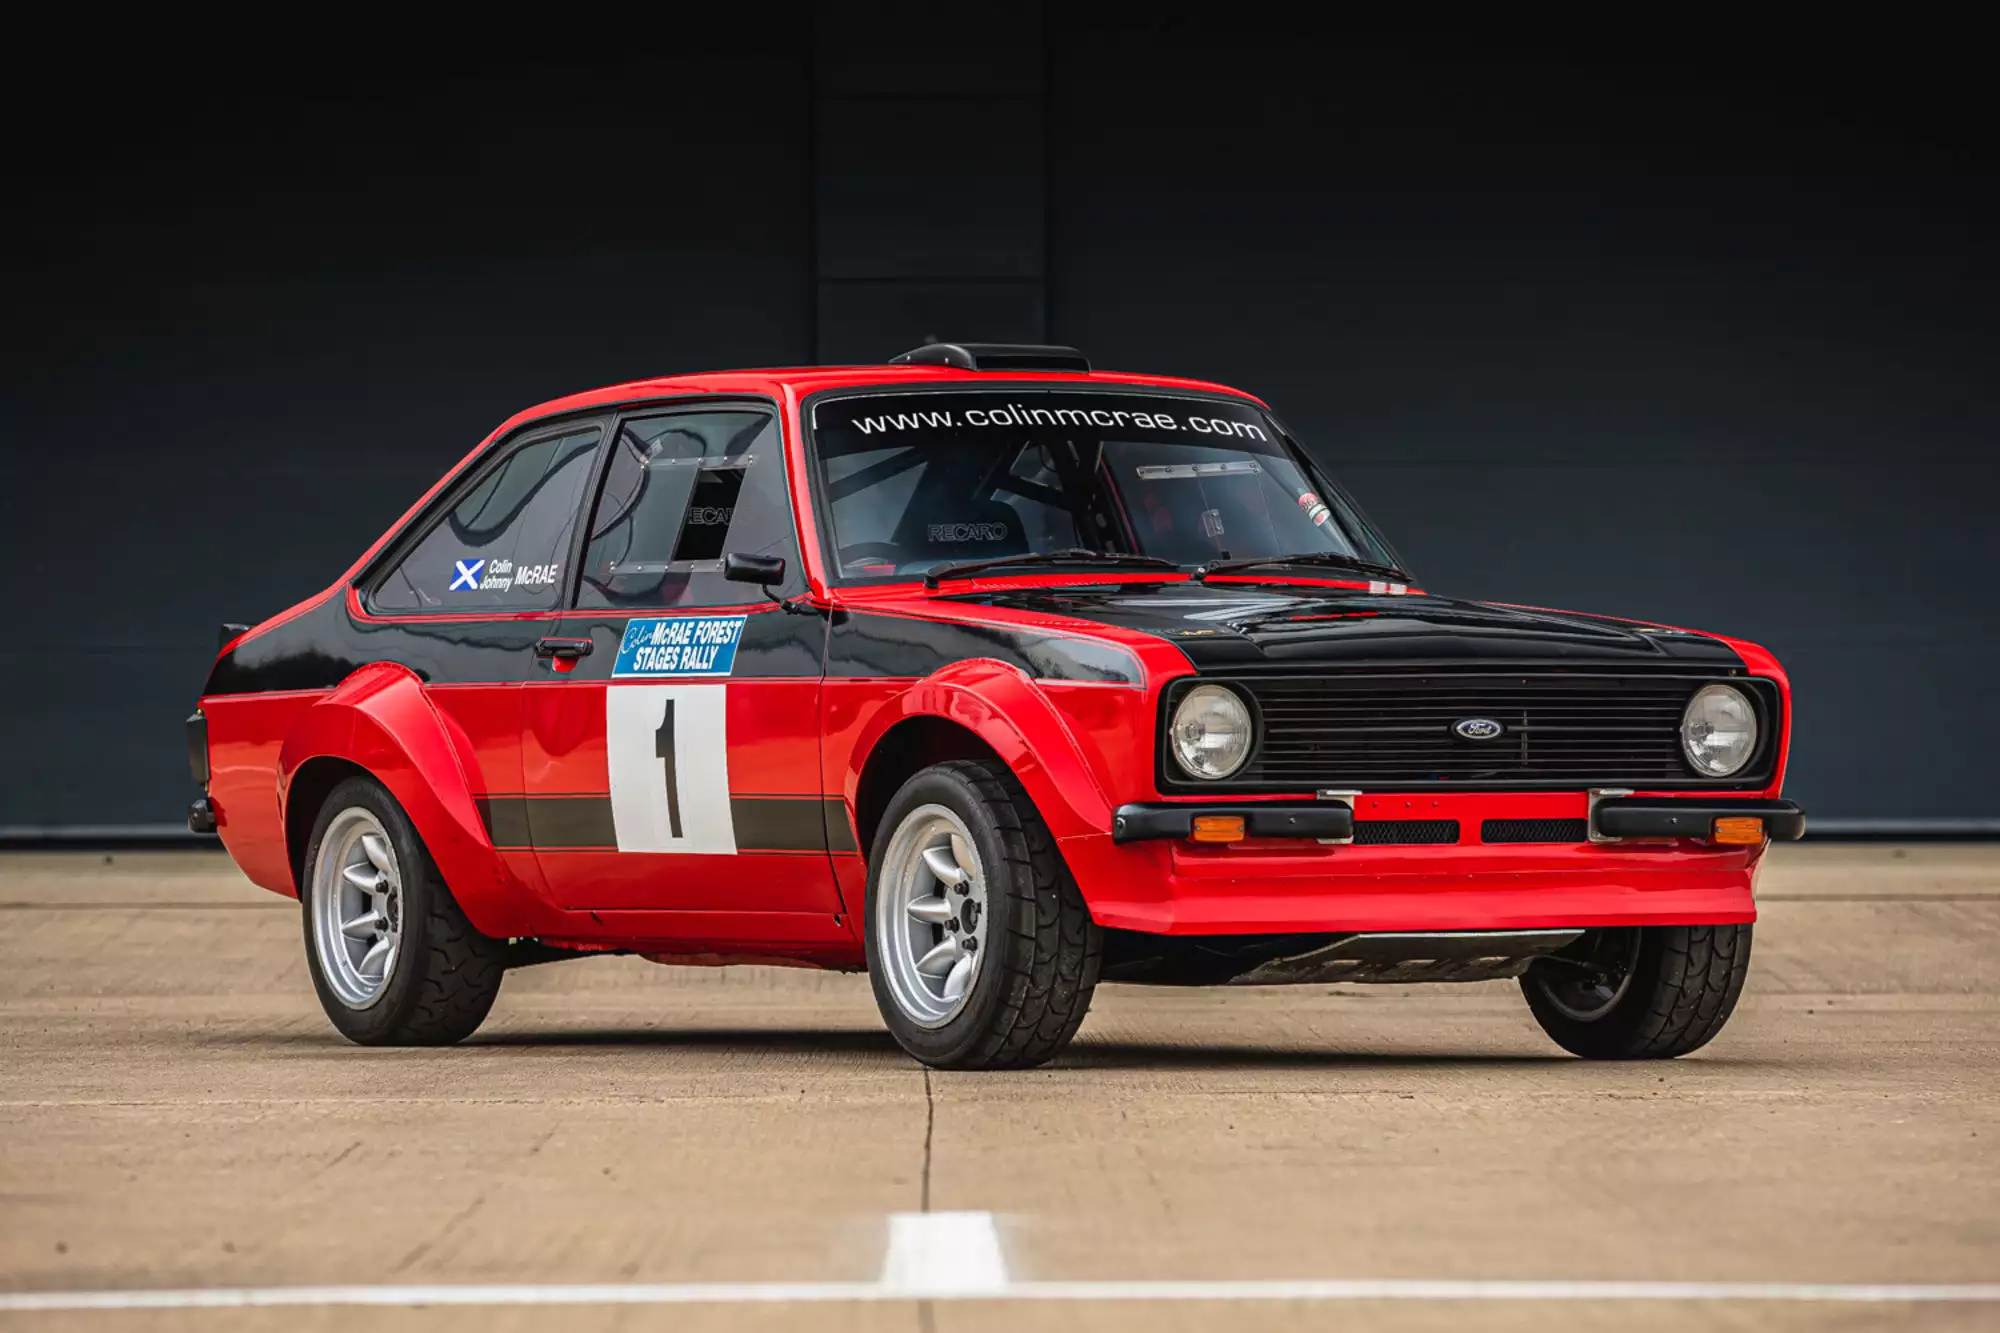 Iconic Auctioneers - Colin McRae Collection